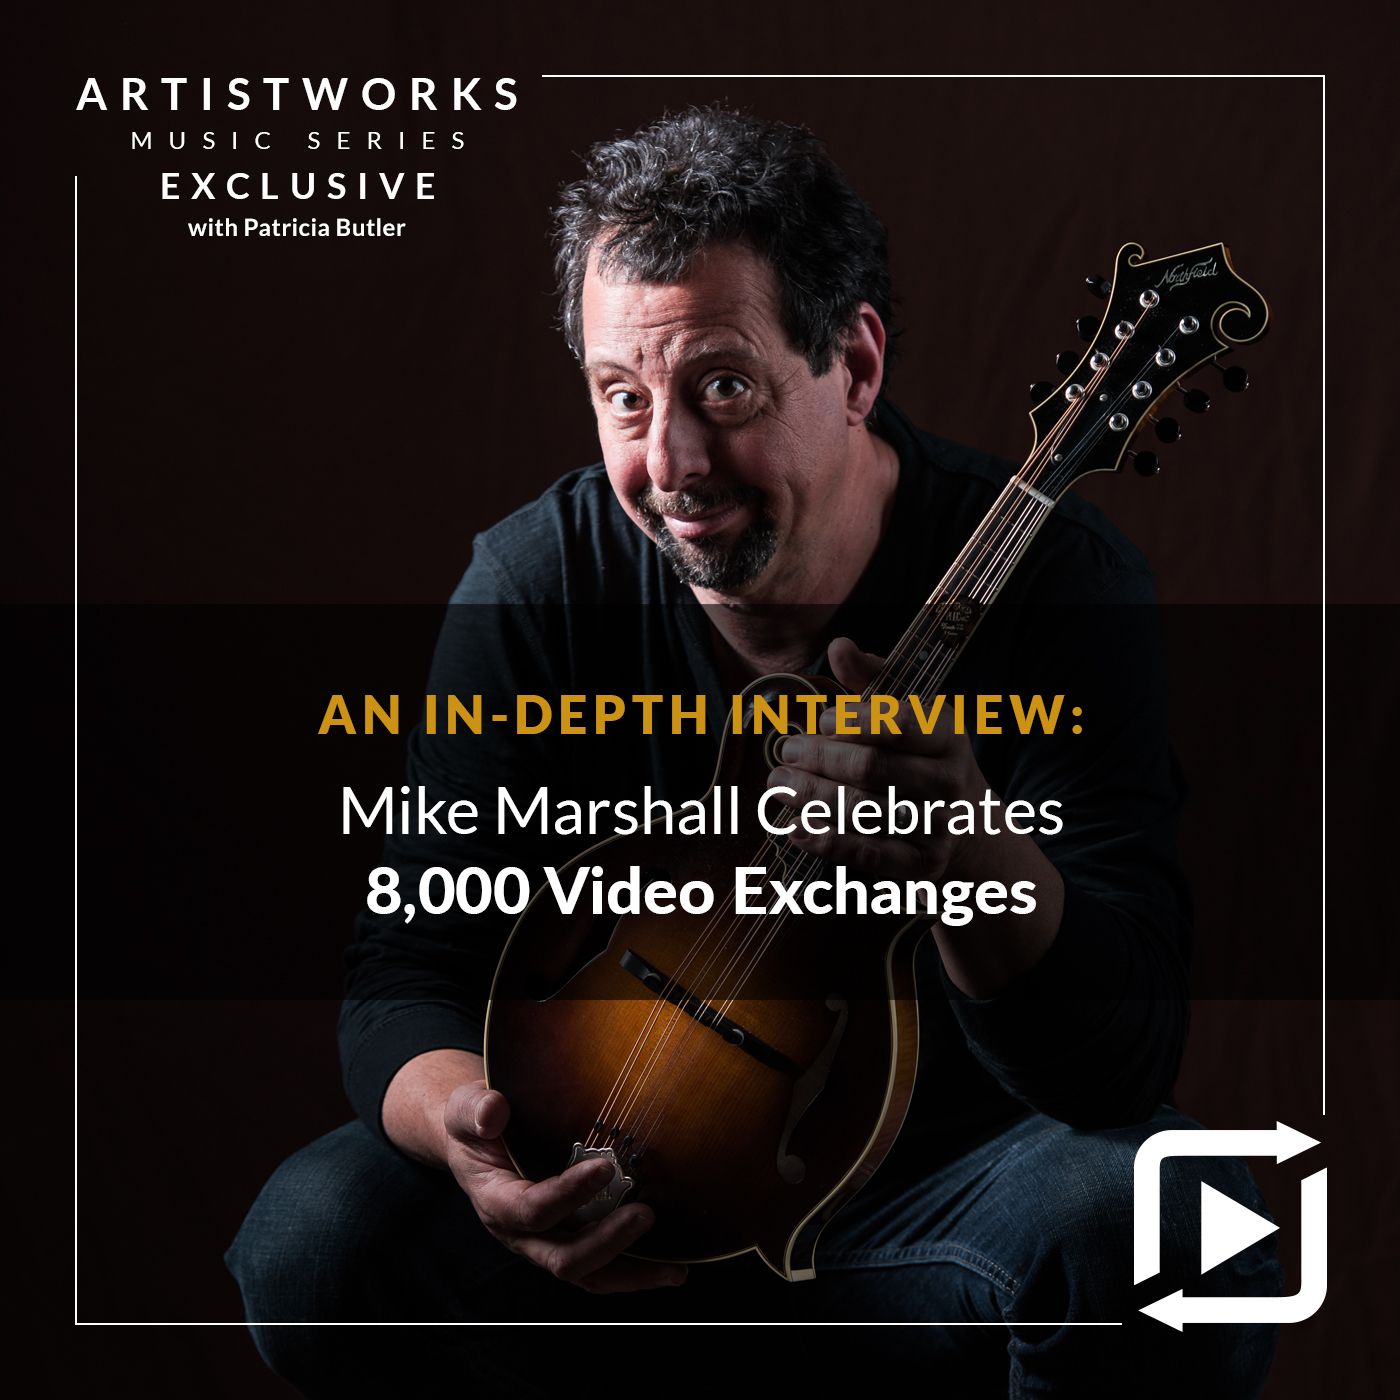 An In-Depth Interview: Mike Marshall Celebrates 8,000 Video Exchanges